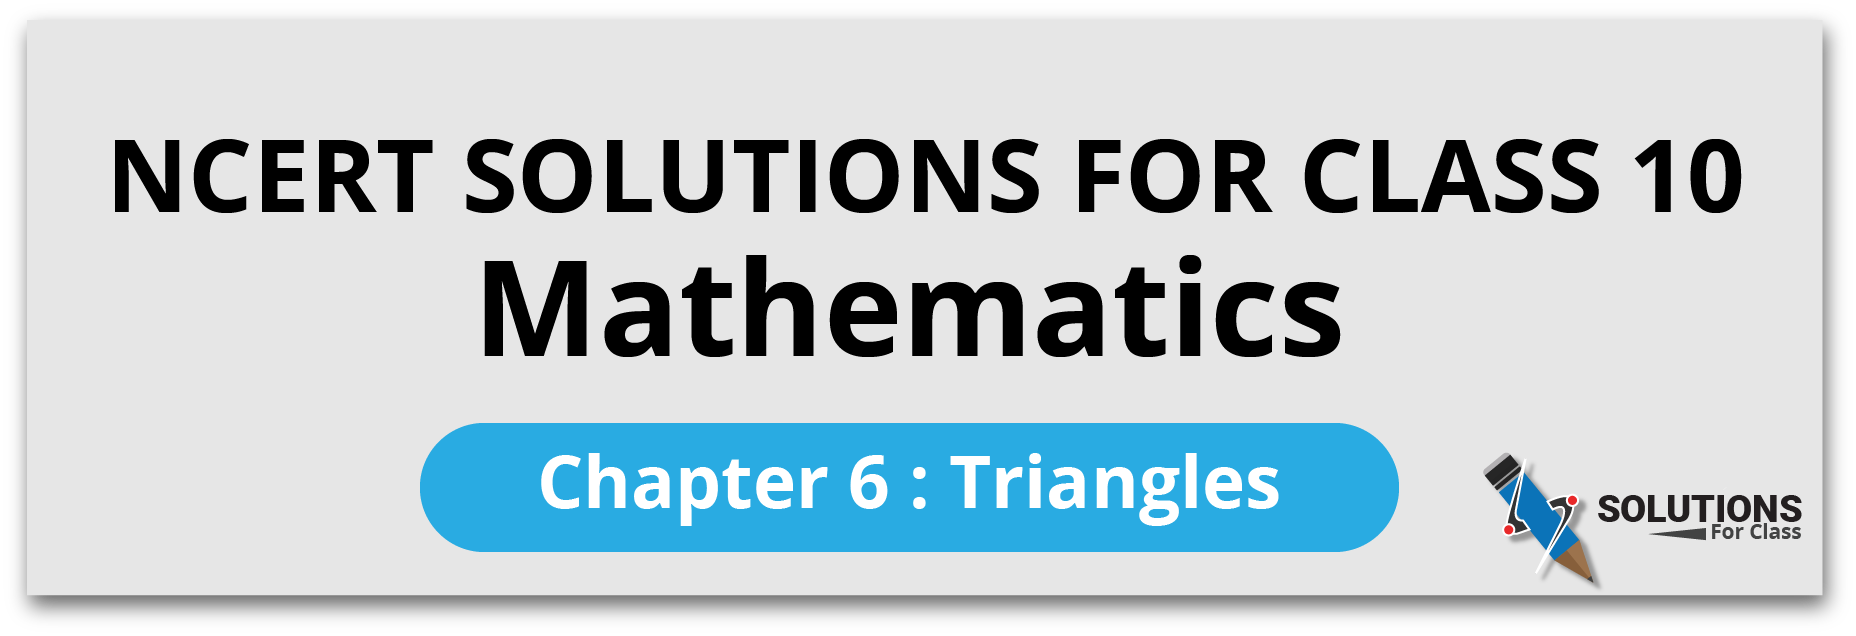 NCERT Solutions For Class 10, Maths, Chapter 6, Triangles